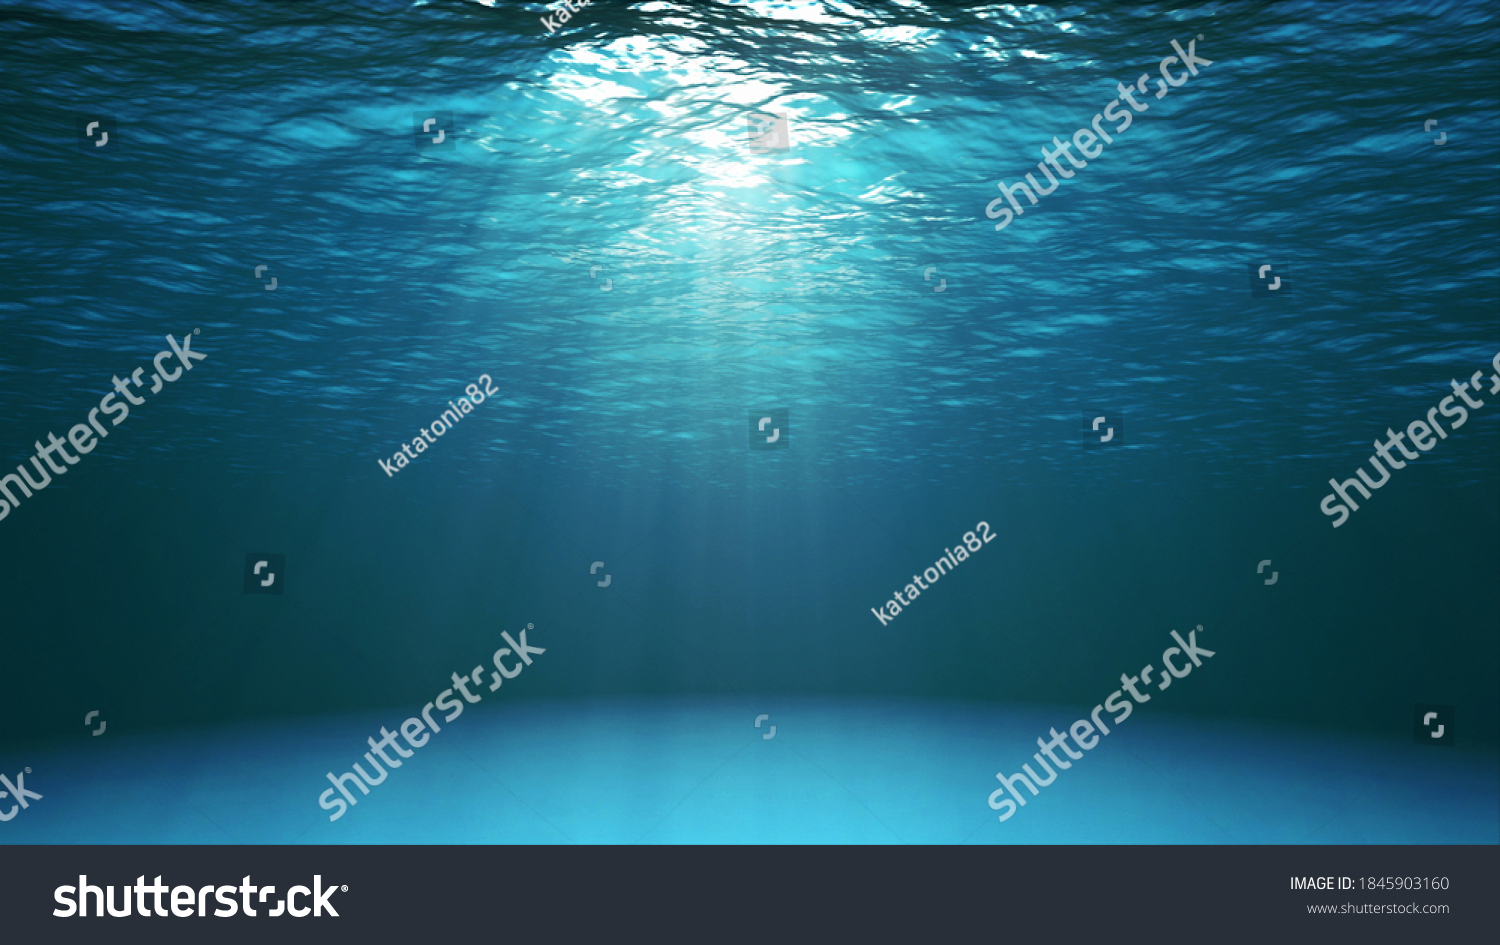 Blue ocean surface seen from underwater. Abstract waves underwater and rays of sunlight shining through water #1845903160